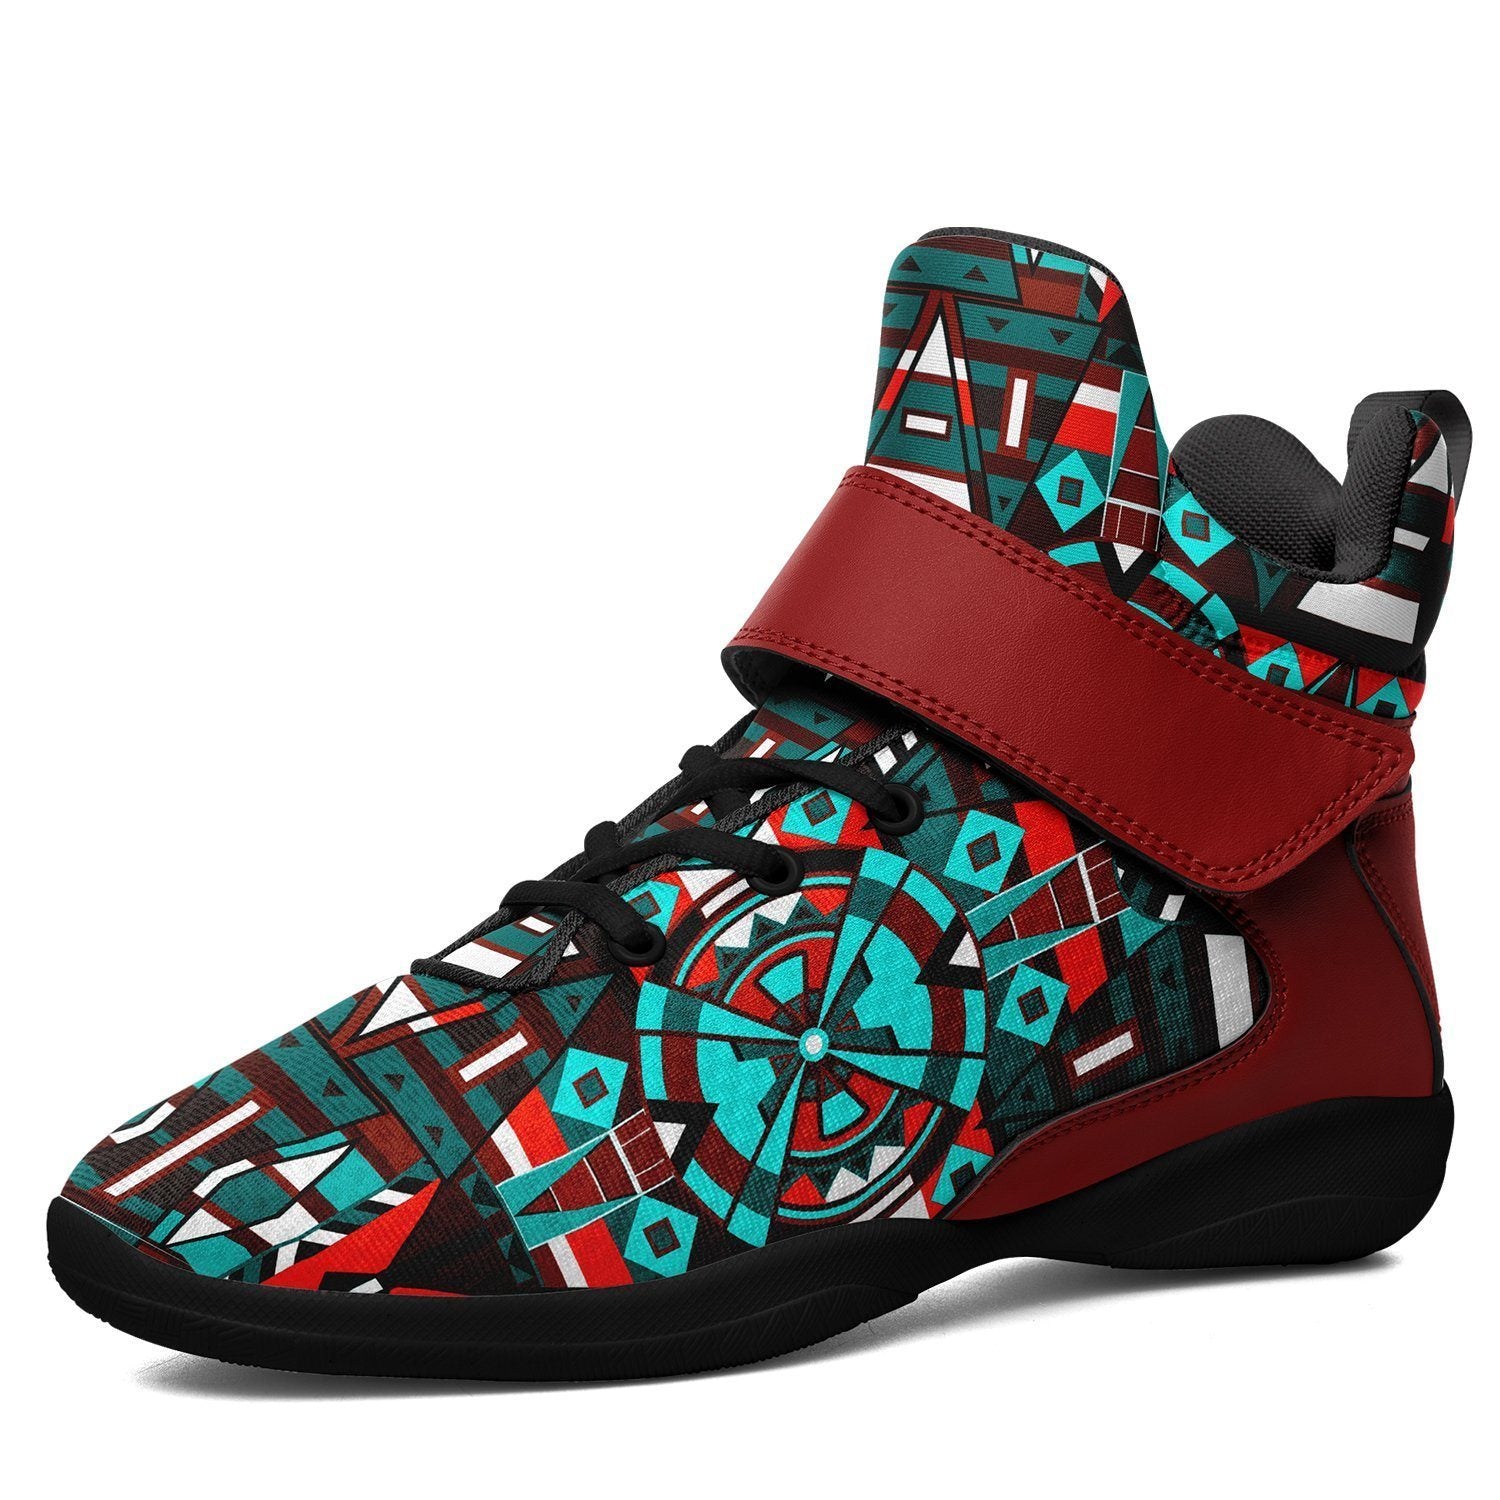 Captive Winter II Ipottaa Basketball / Sport High Top Shoes - Black Sole 49 Dzine US Men 7 / EUR 40 Black Sole with Dark Red Strap 